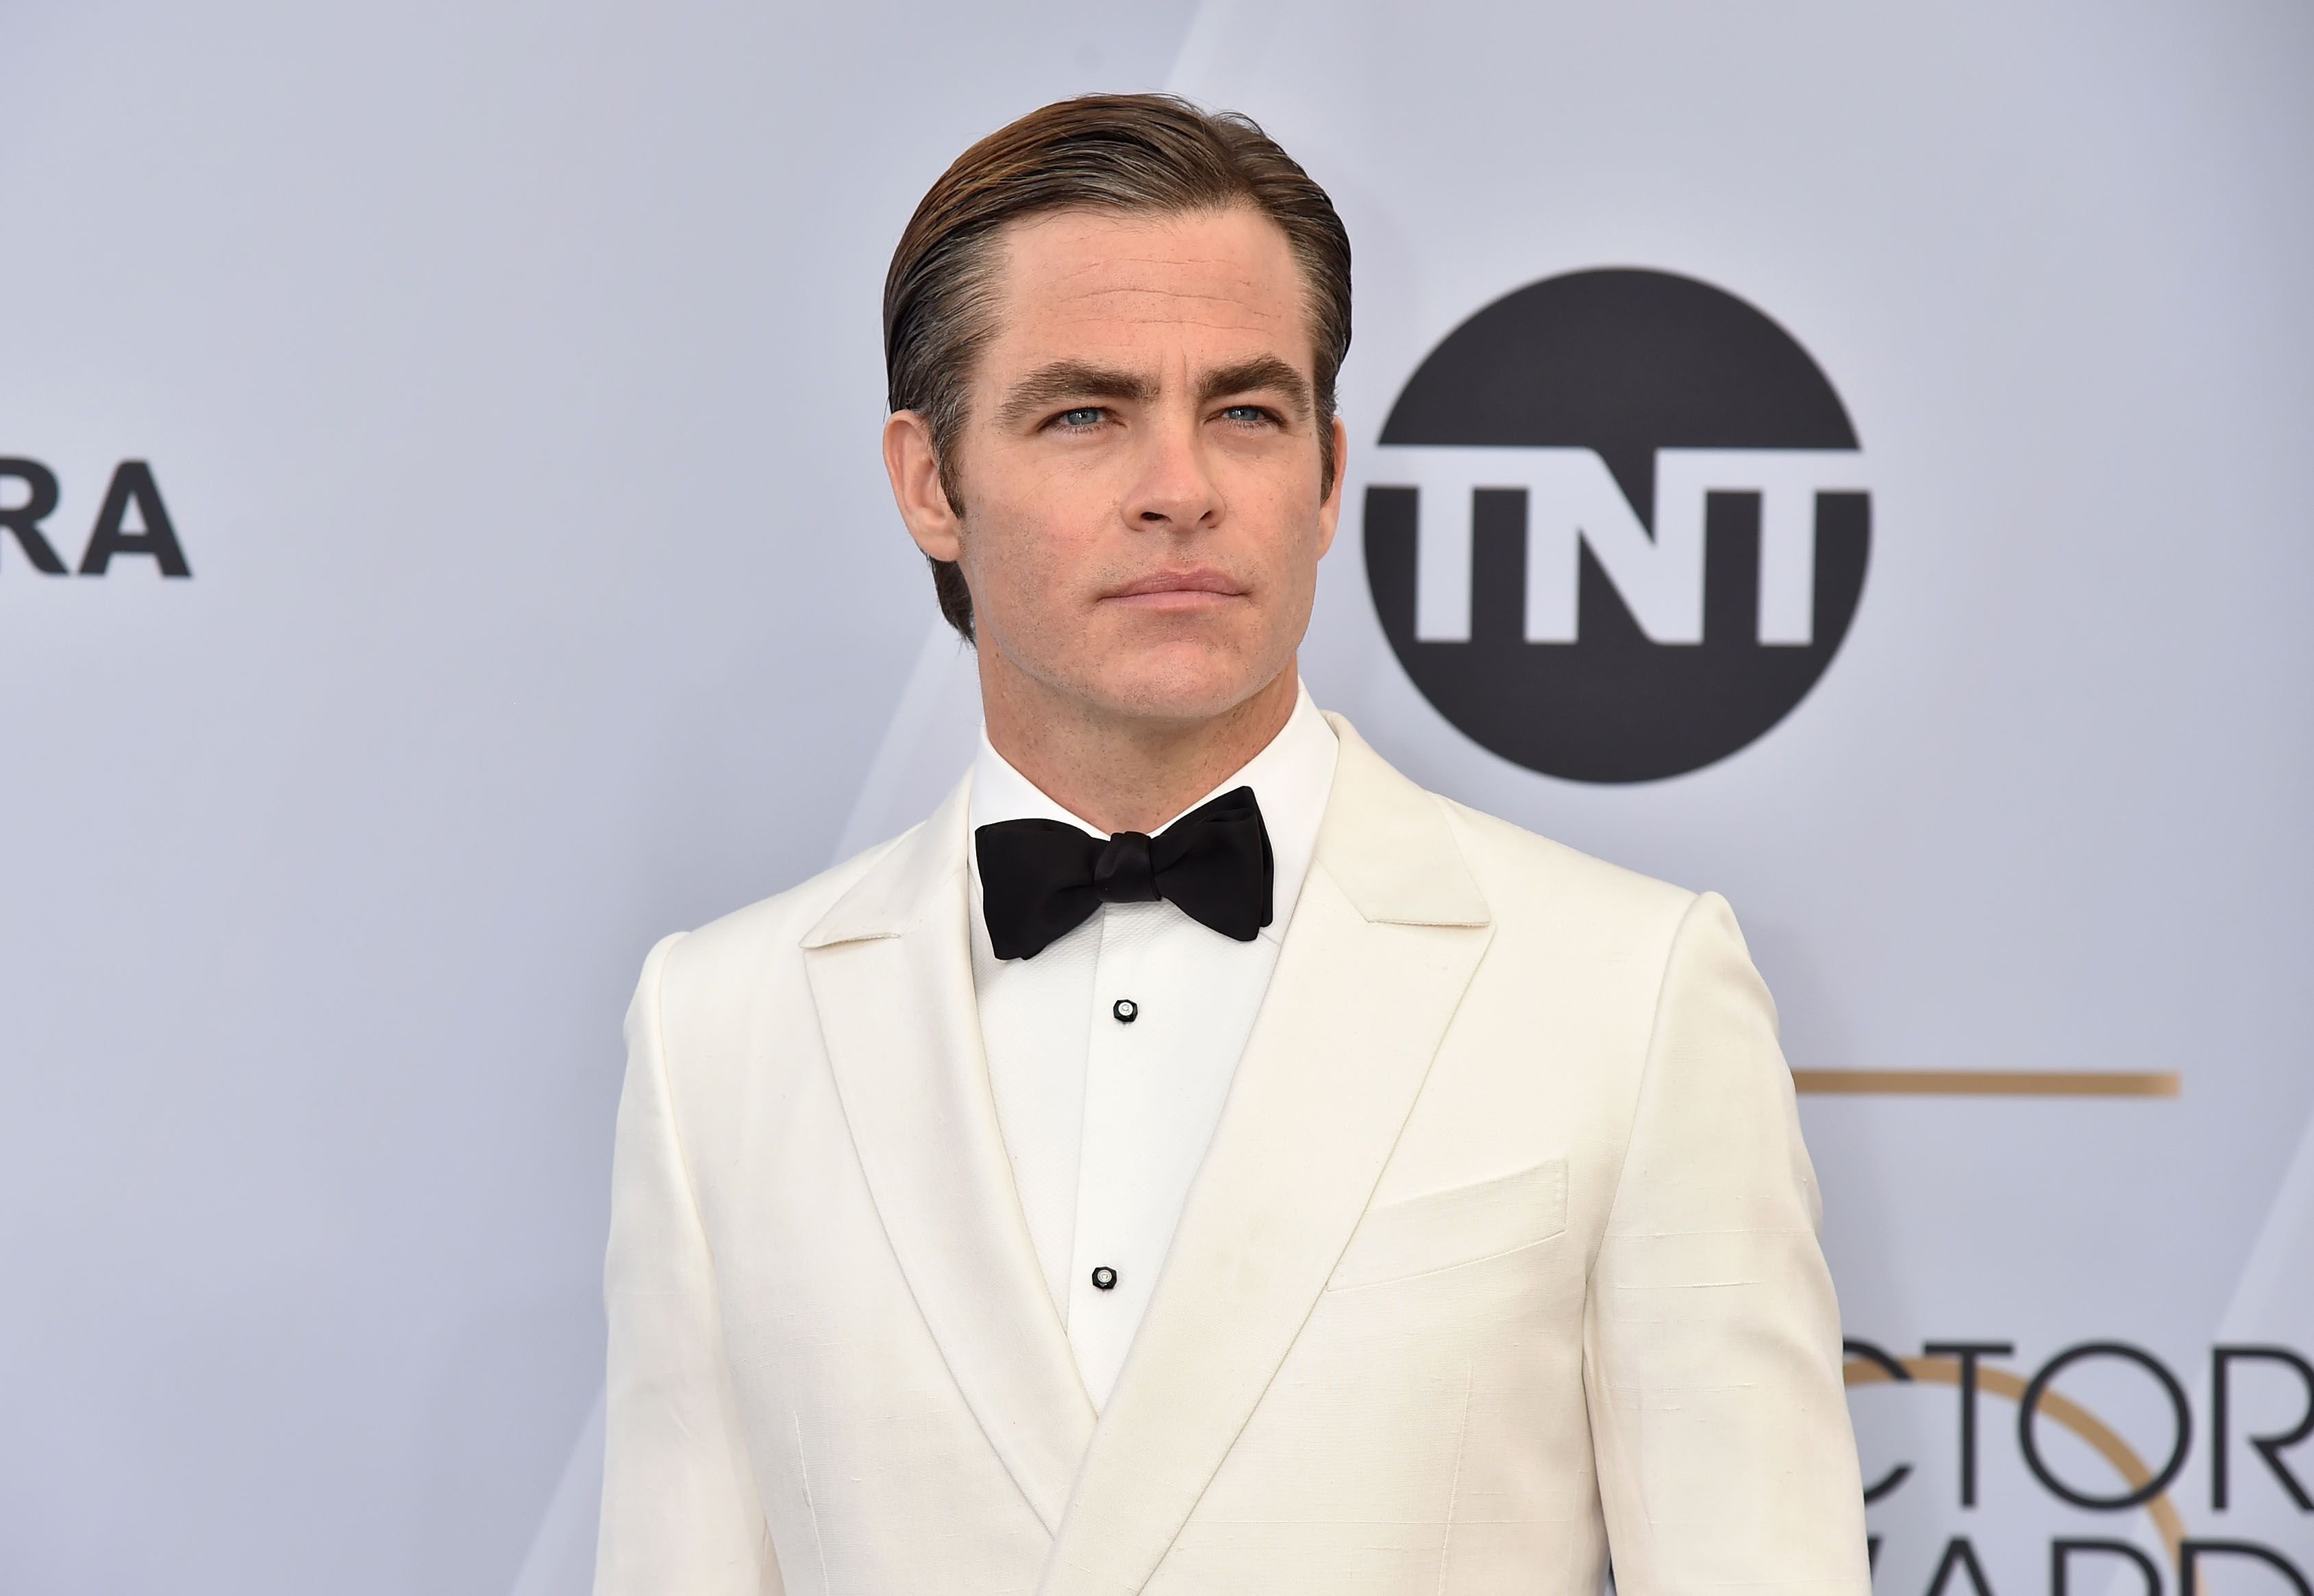 Chris Pine at the 25th Annual Screen Actors Guild Awards on January 27, 2019 in Los Angeles, California. | Source: Getty Images